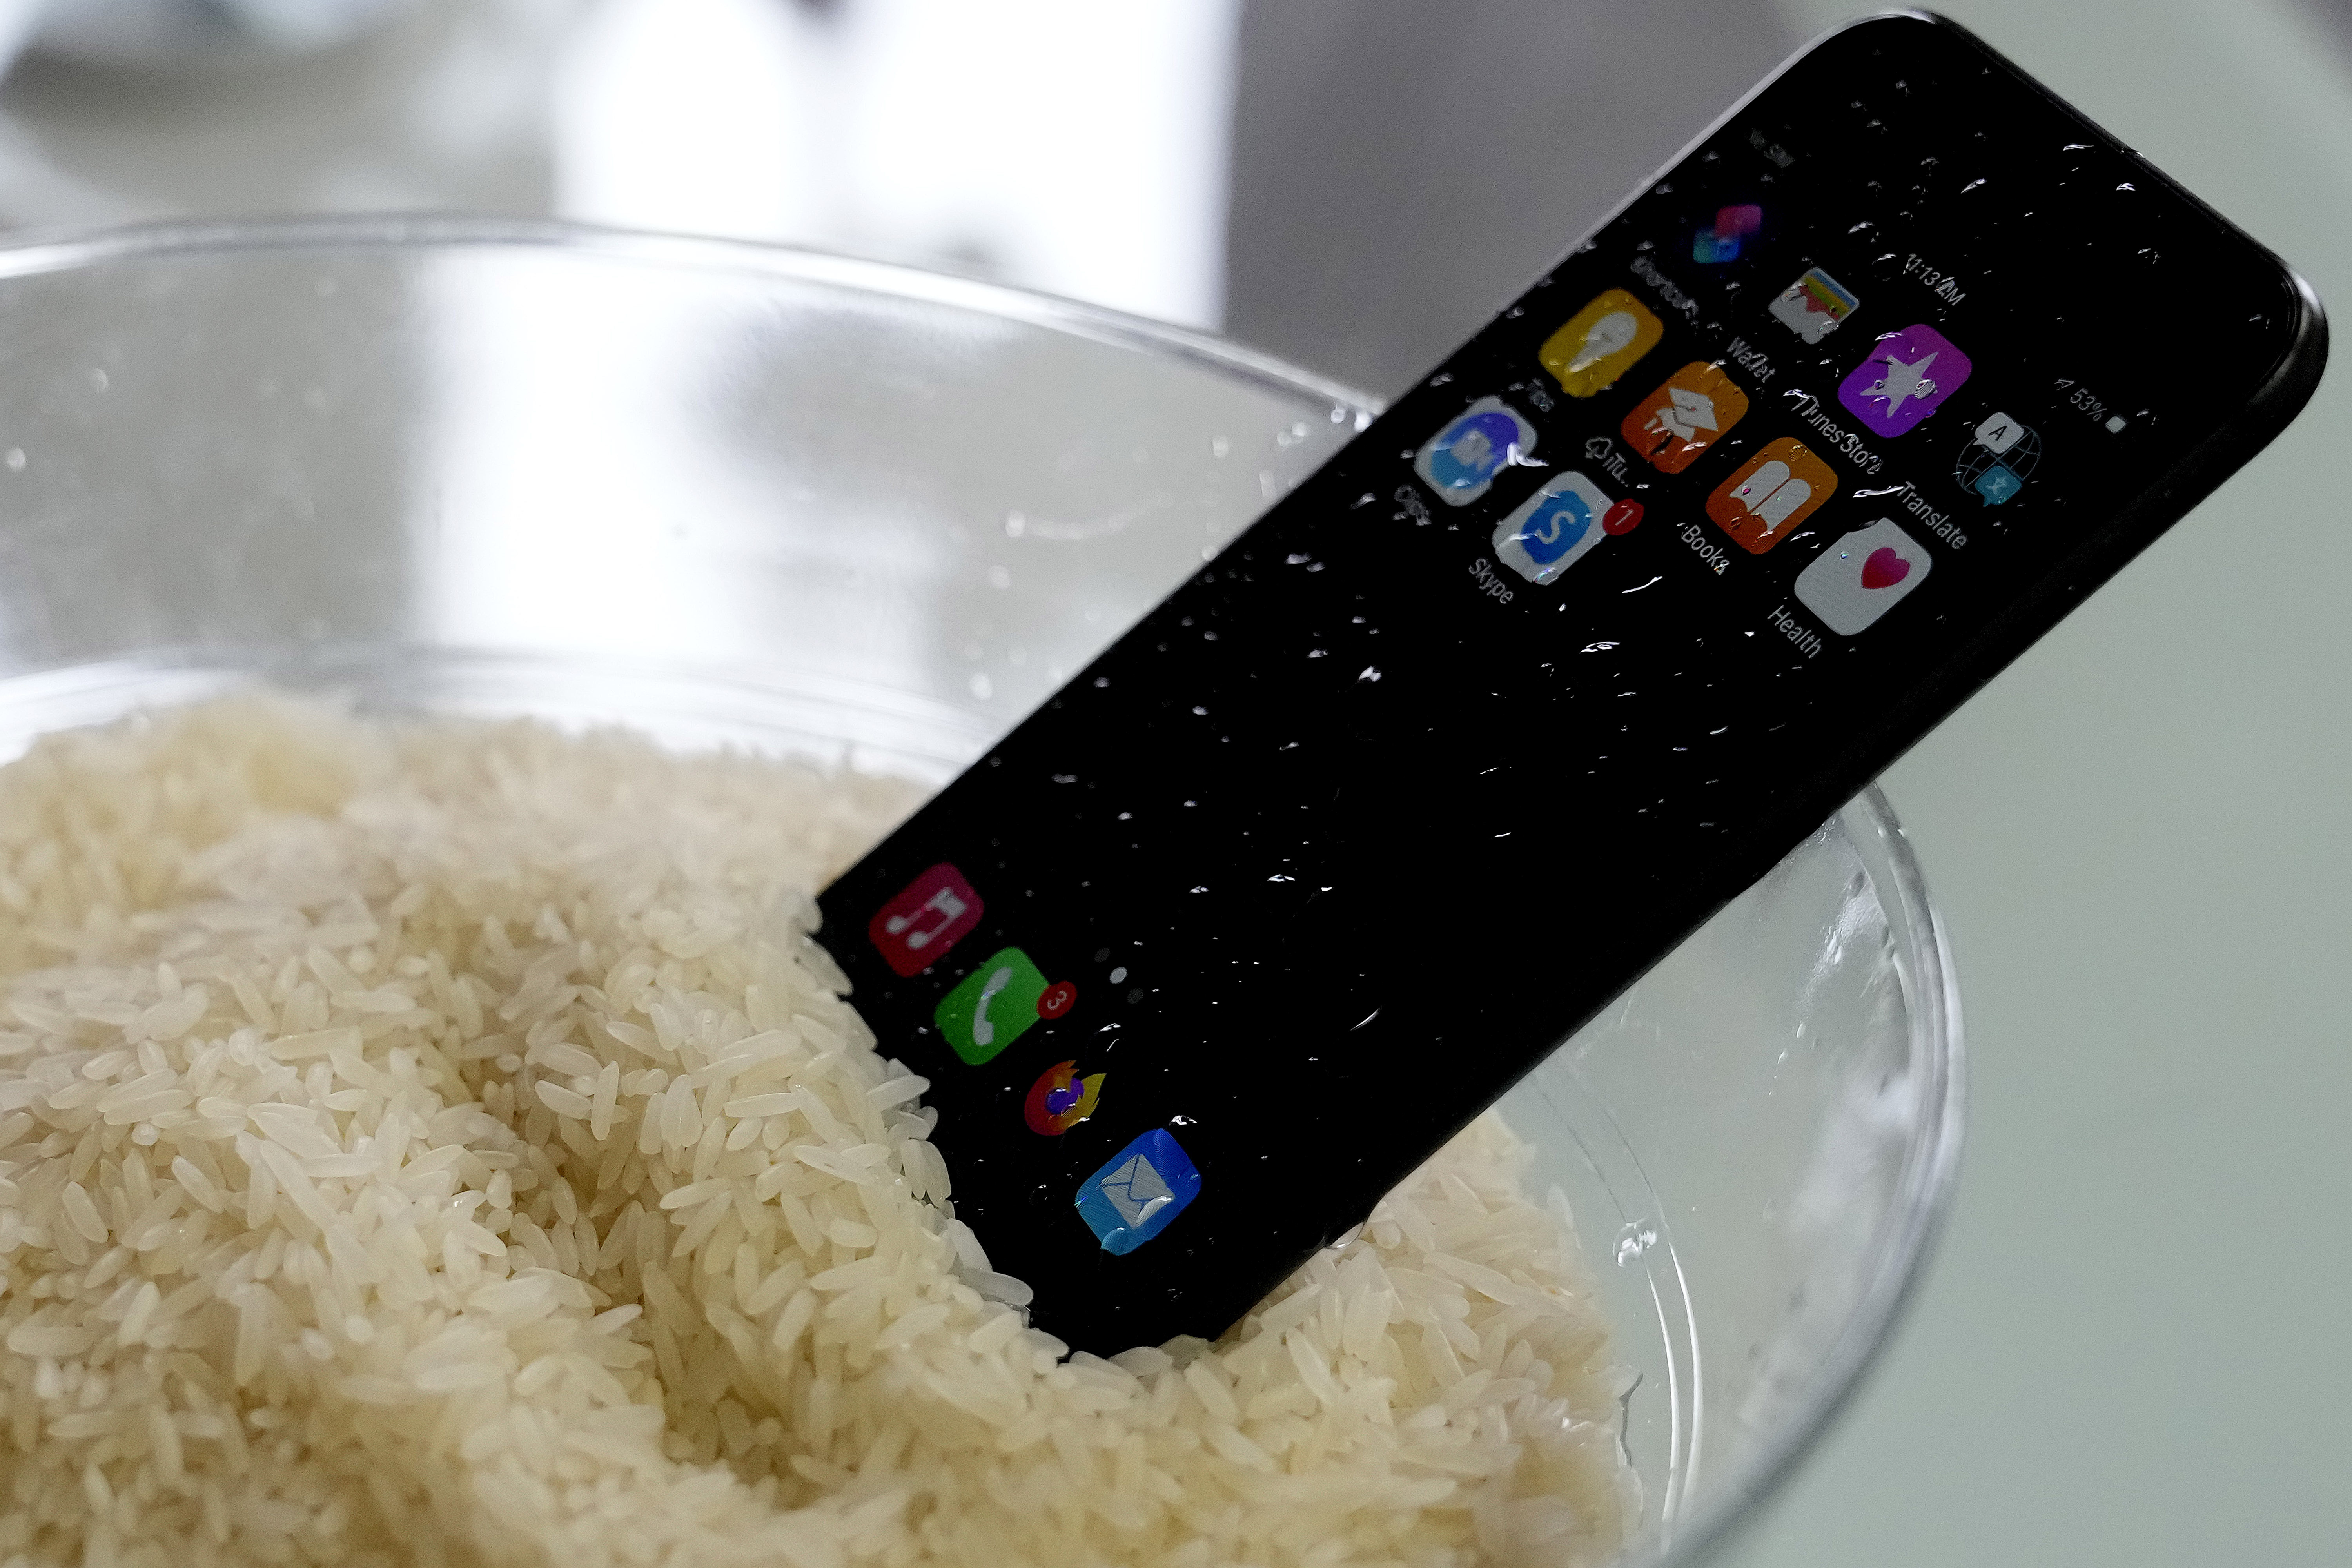 There's a lot of advice on the internet about what to do if you drop your phone in water, some of it conflicting. So what should you do then? Wipe as much moisture off as you can and leave it to dry. Don't use a hair dryer or put on a radiator. But whatever you do, don't dunk your device into a bowl of rice.